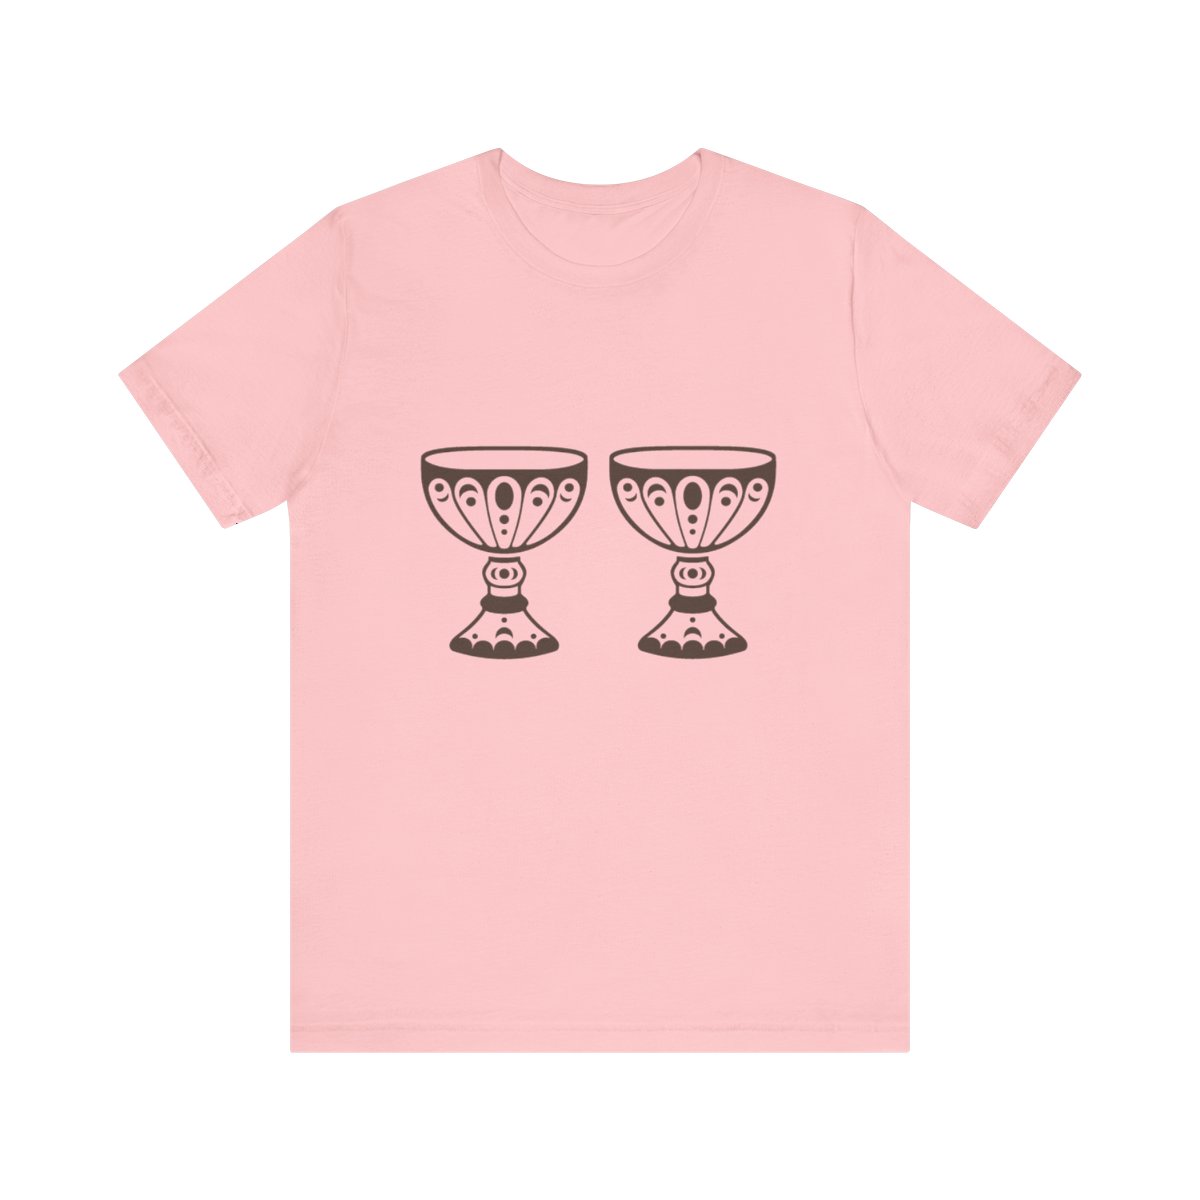 Grail Goblets Tee: Original Pink product main image